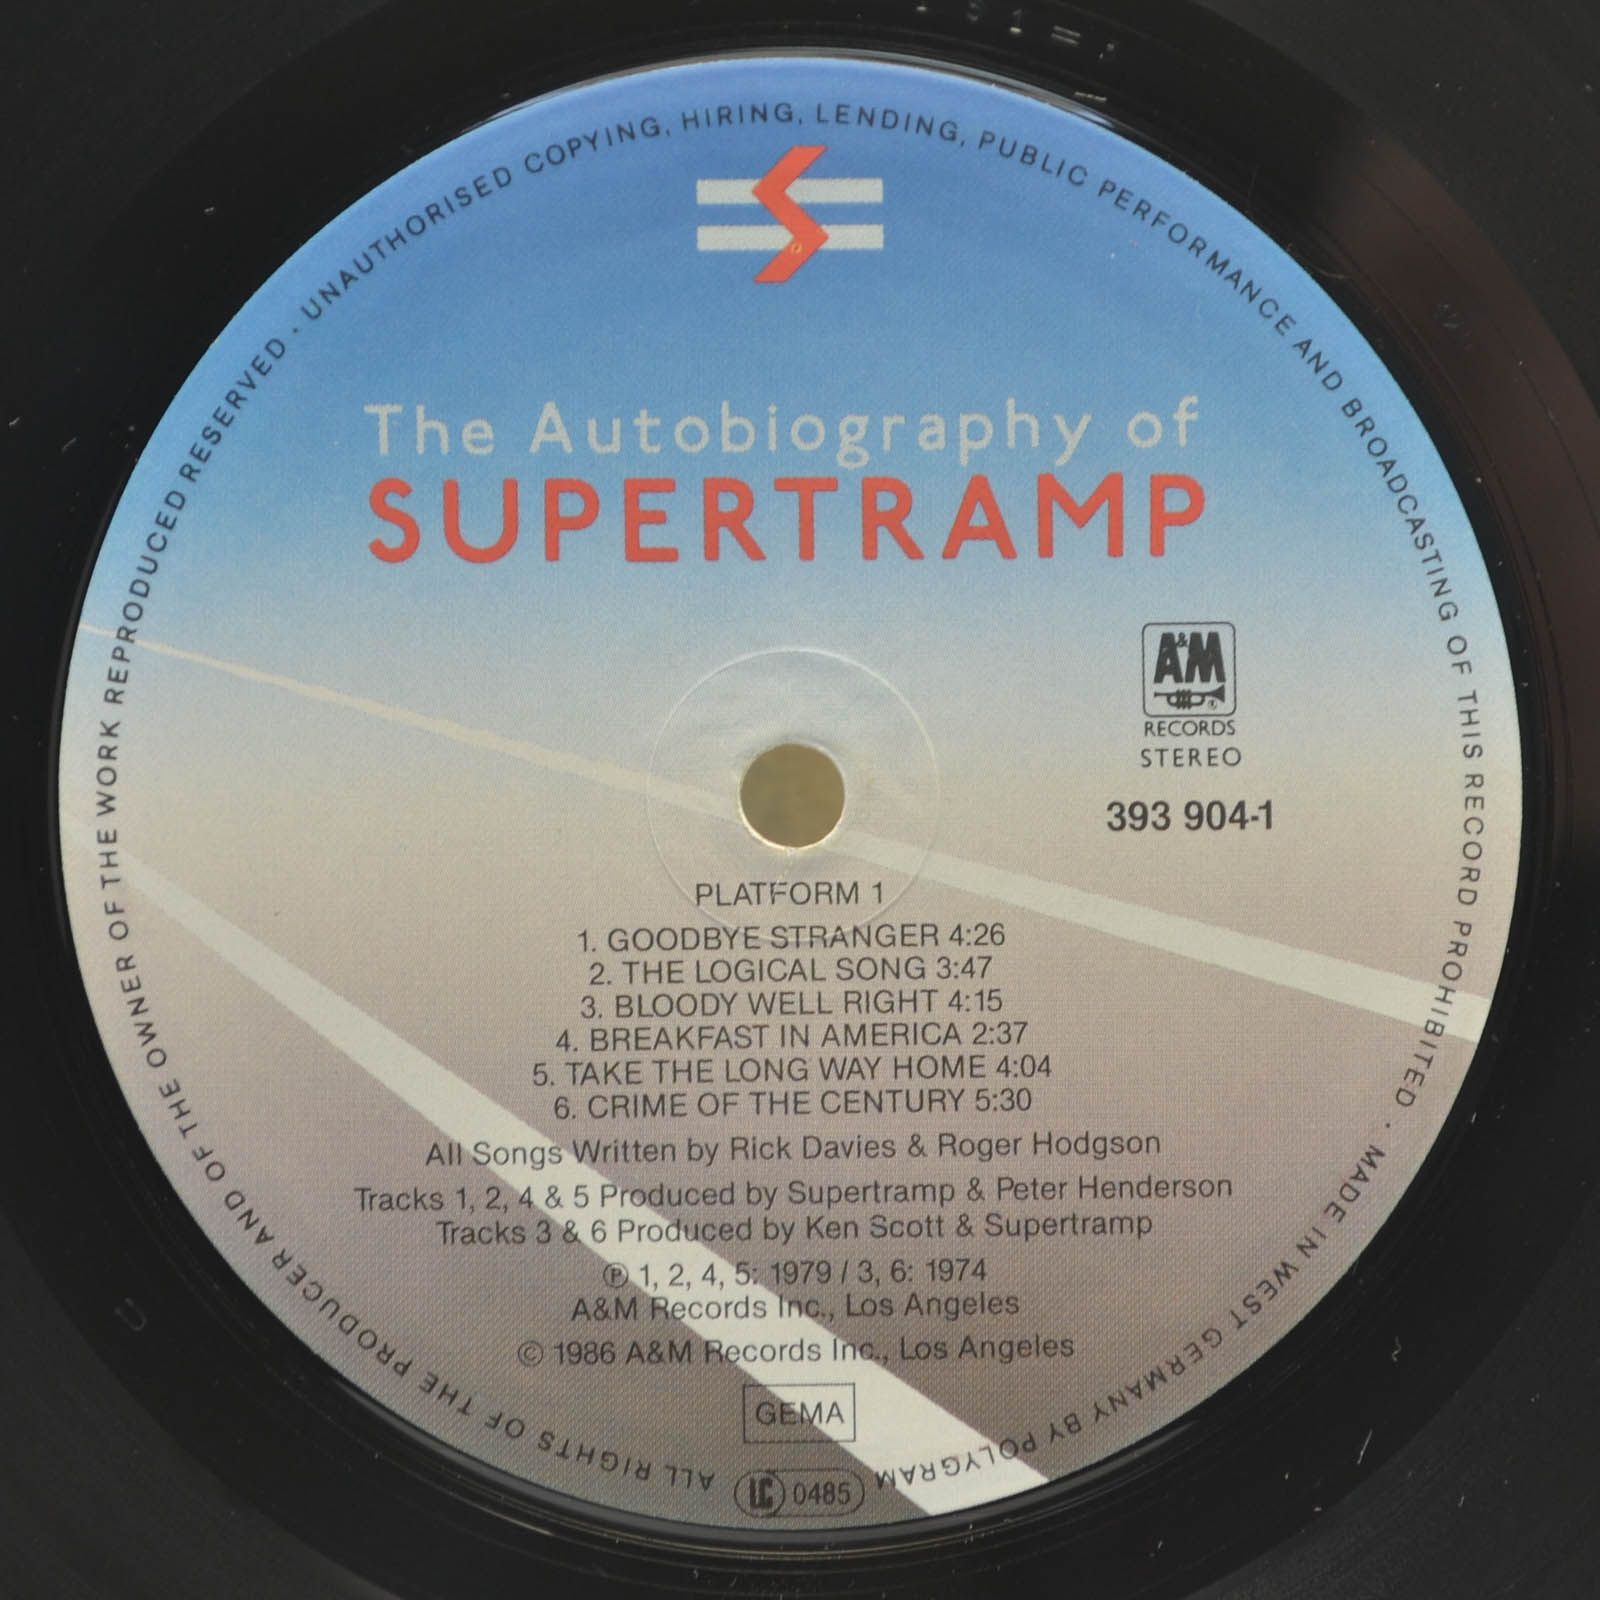 Supertramp — The Autobiography Of Supertramp, 1986